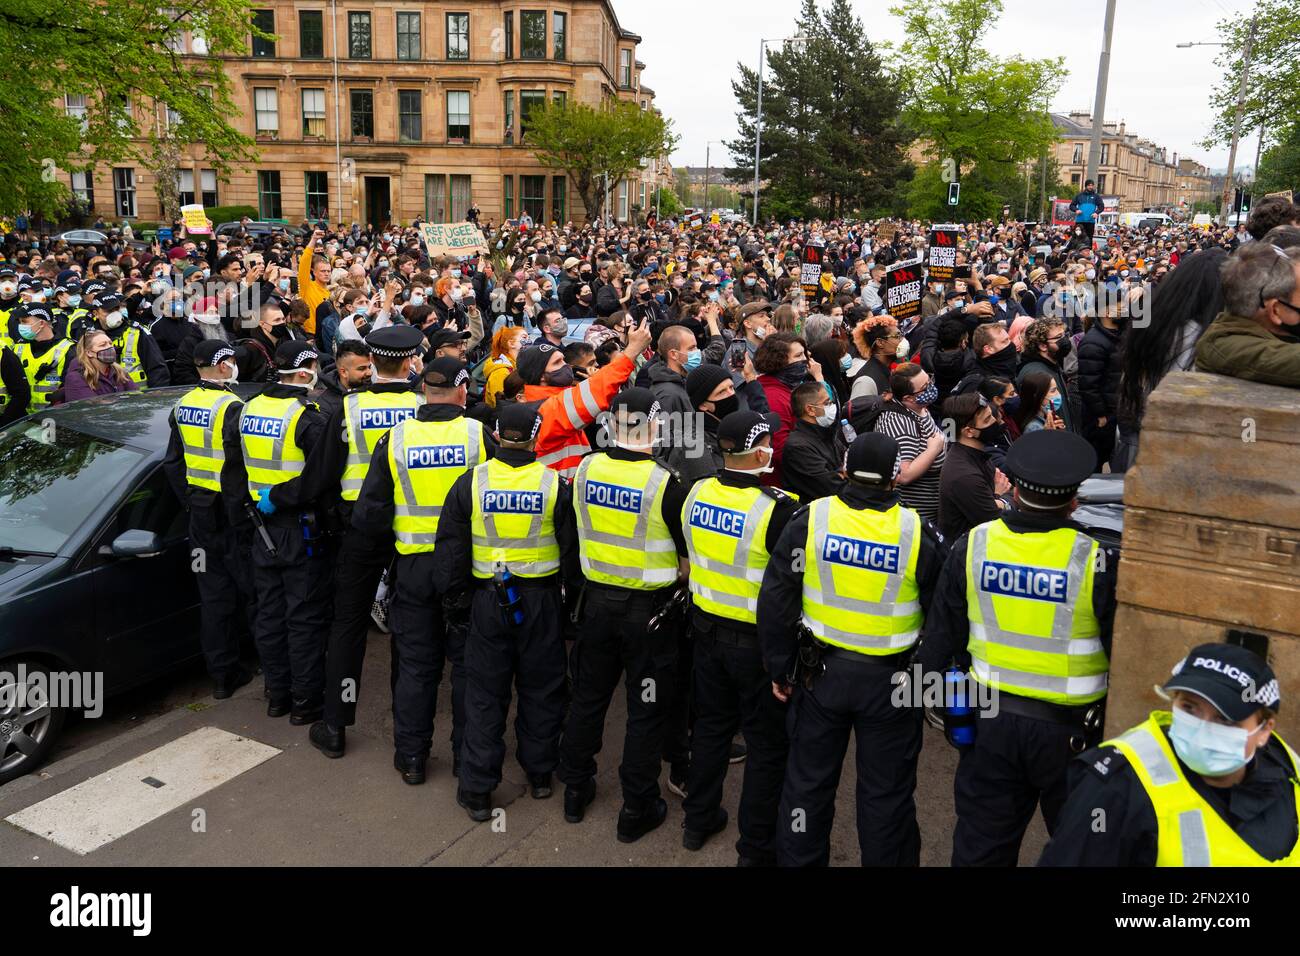 Glasgow, Scotland, UK. 13th May, 2021. At approx 5.30 pm police released two men from a Home Office detention vehicle. Accompanied by lawyer Aamer Anwar the men walked to a nearby mosque surrounded by hundreds of police and supporters who had previously been surrounding the vehicle and sitting on the street. Pic; supporters on street in front of the mosque. Credit: Iain Masterton/Alamy Live News Stock Photo